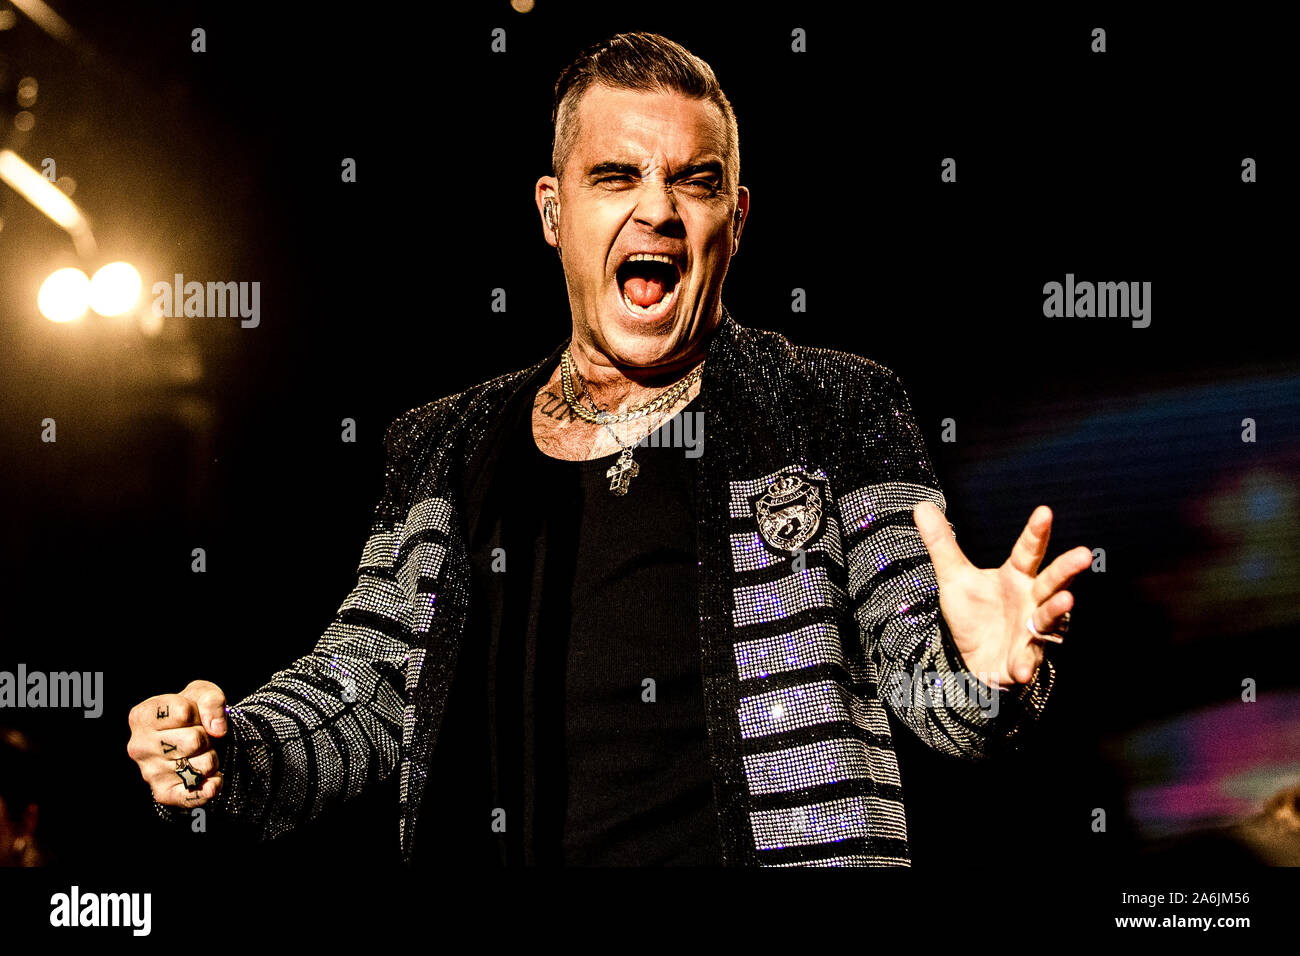 Skanderborg, Denmark. 07th, August 2019. Robbie Williams, the English singer, songwriter and musician, performs a live concert during the Danish music festival SmukFest 2019 in Skanderborg. (Photo credit: Gonzales Photo - Lasse Lagoni). Stock Photo